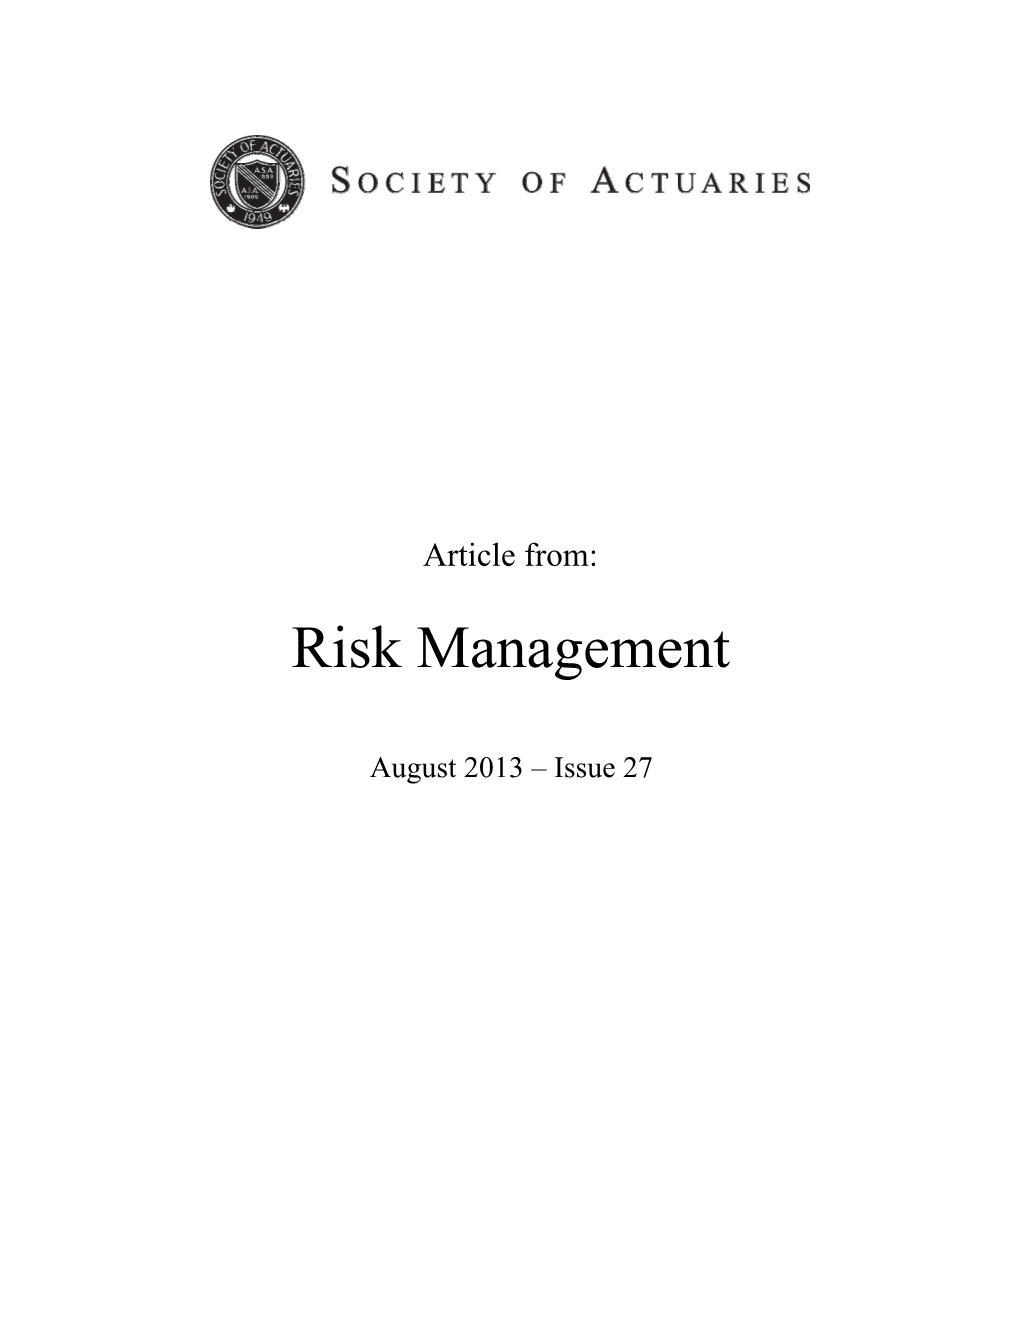 Risk Management in International Business by April Xuemei Hou